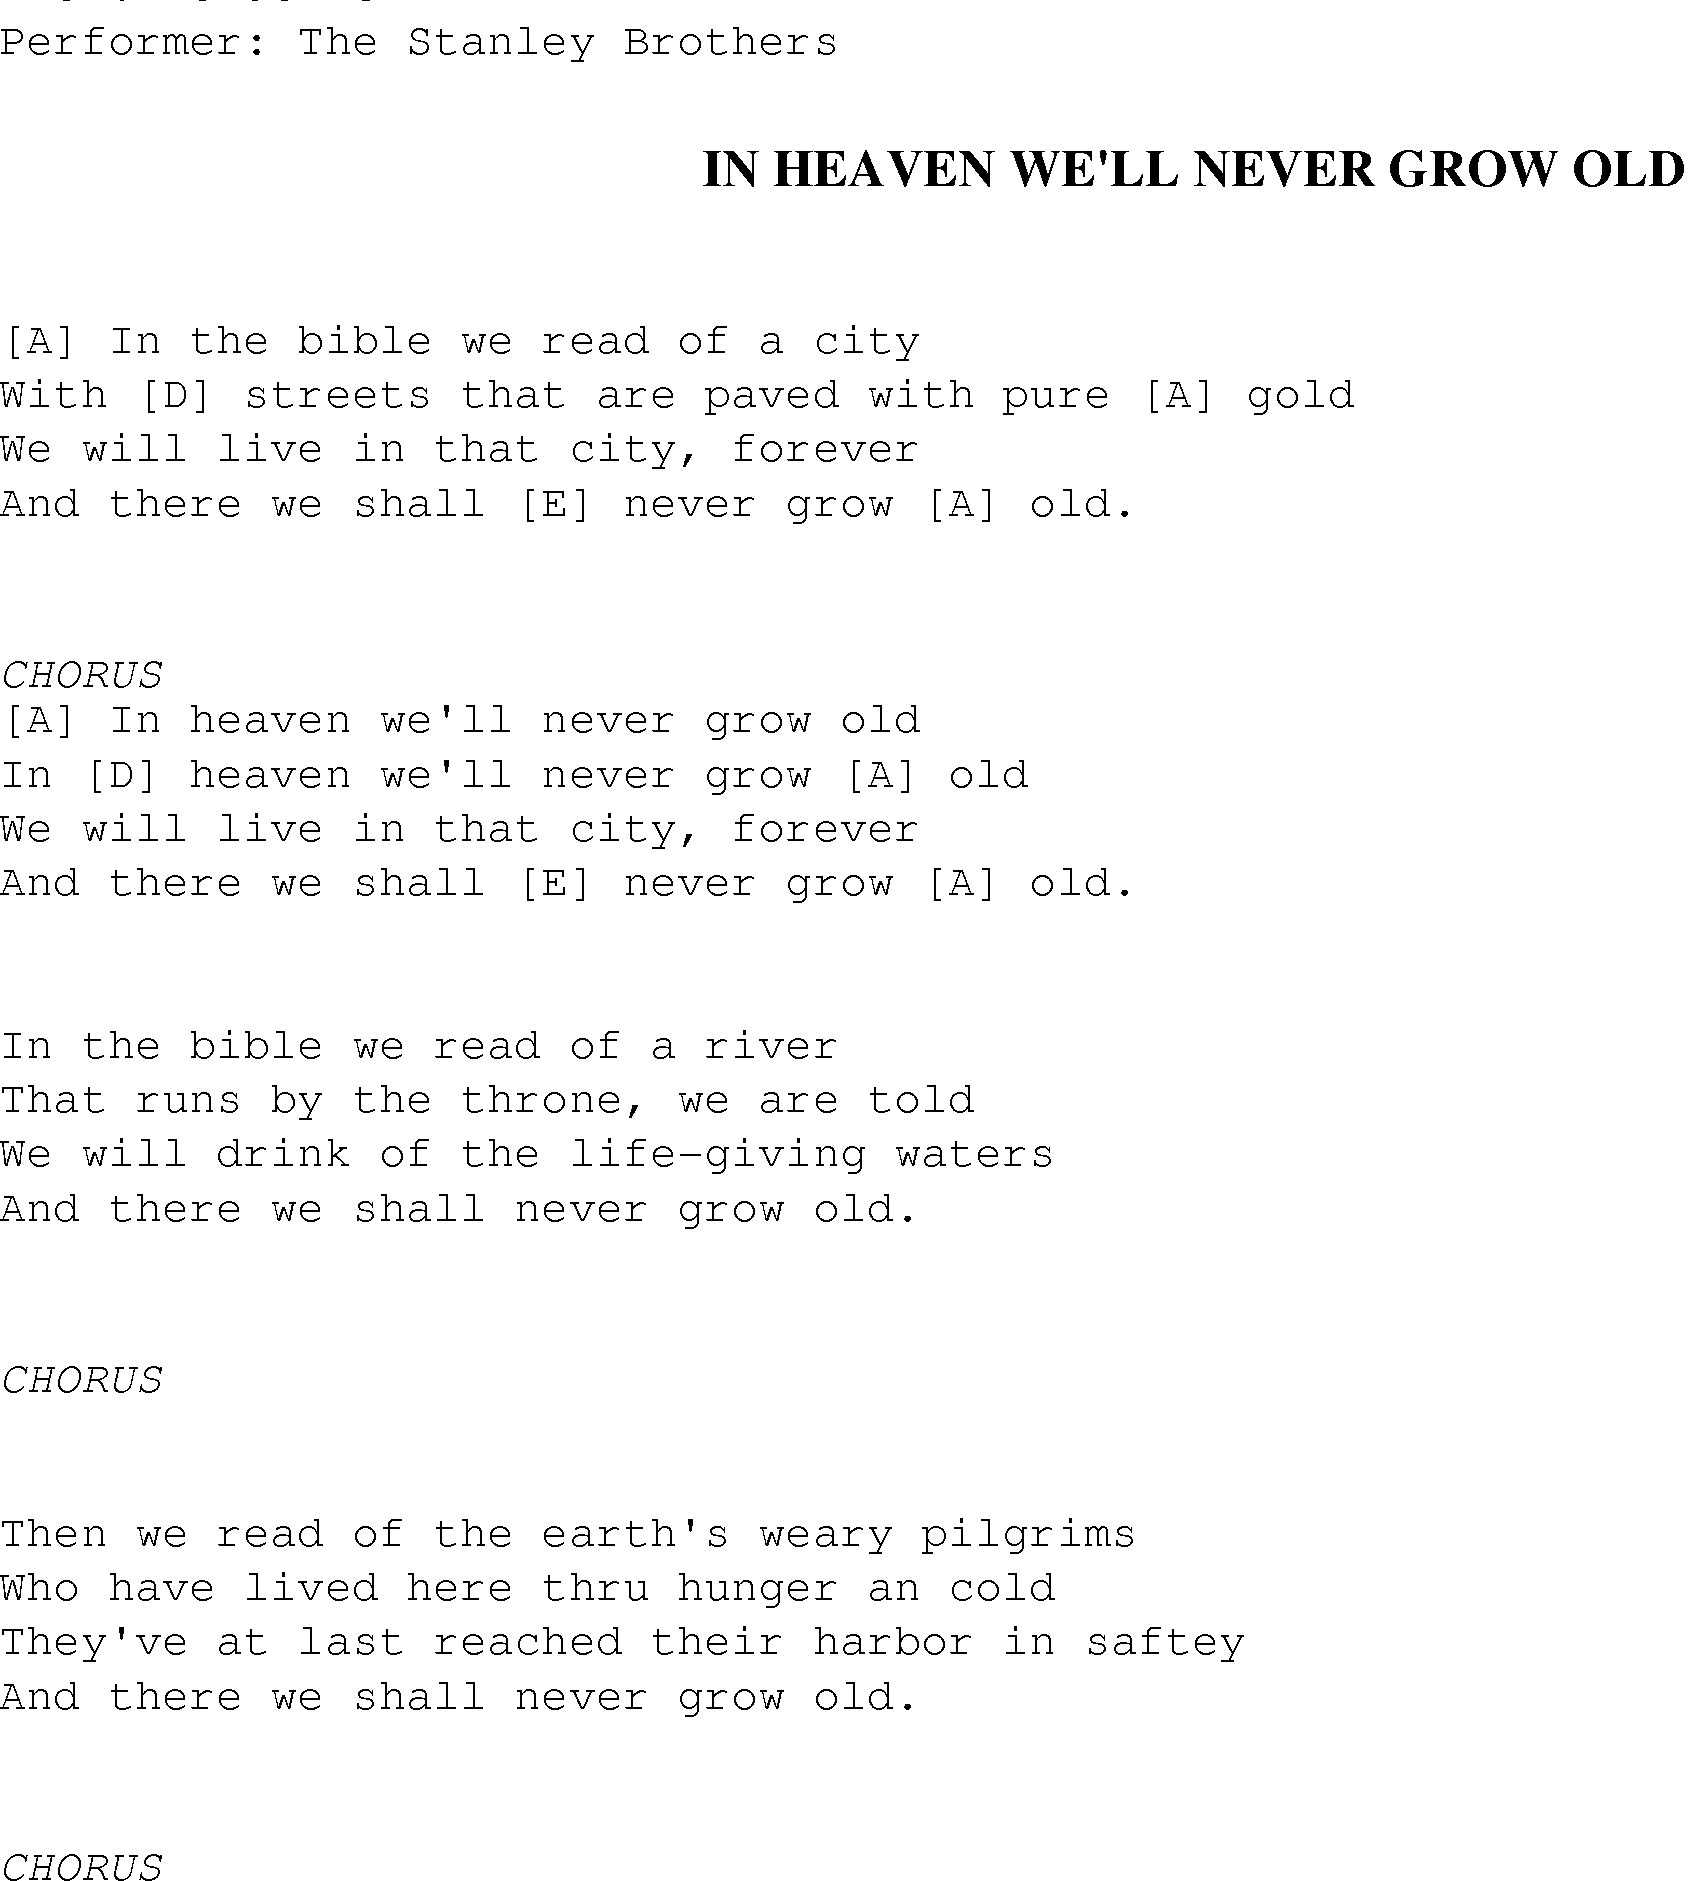 Gospel Song: in_heaven_well_never_grow_old, lyrics and chords.